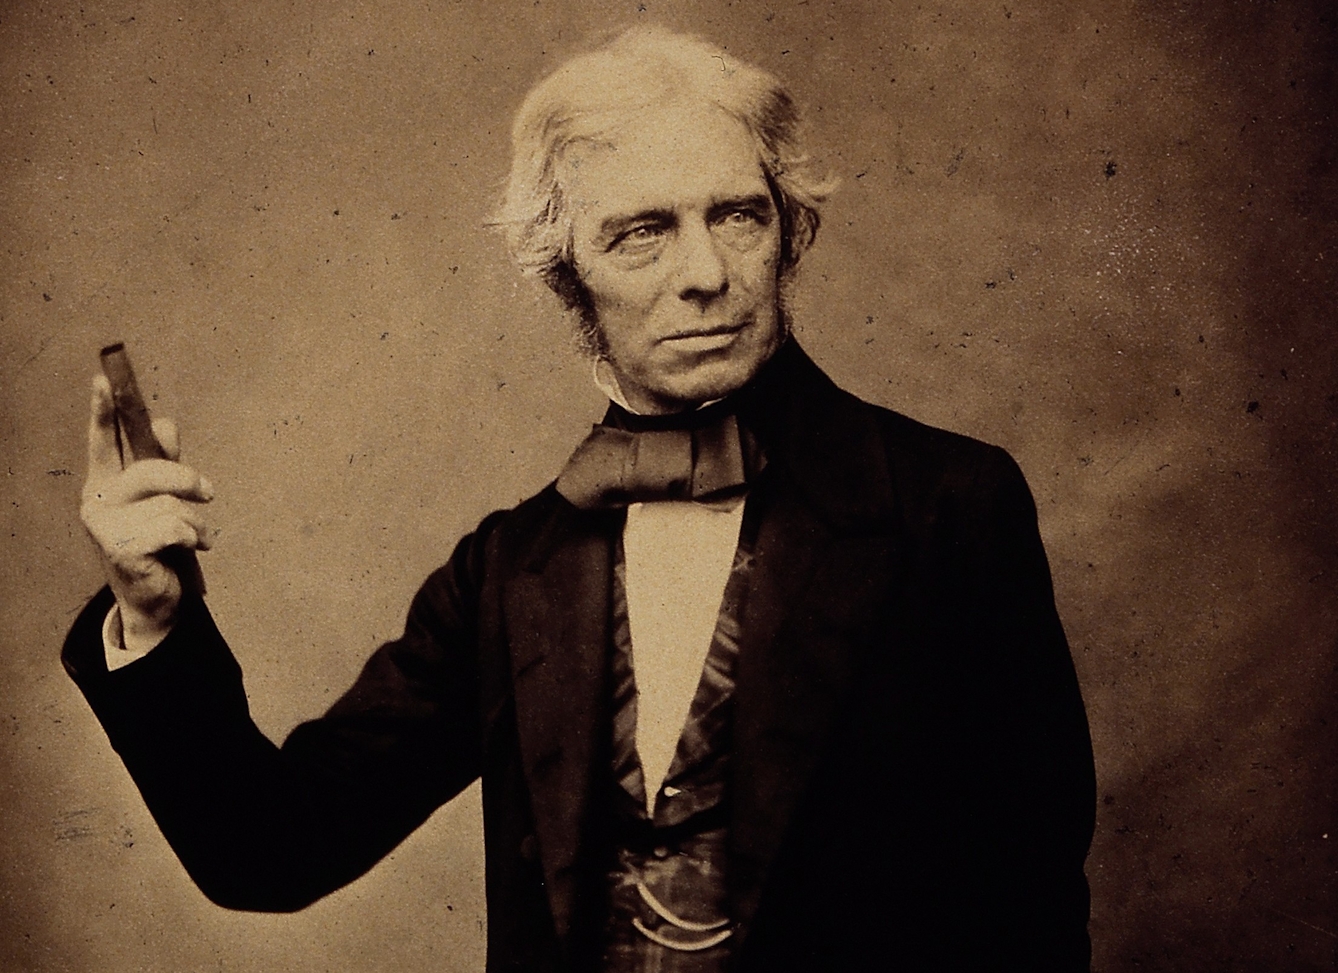 A key scientist in the study of electricity, Faraday saw it as a manifestation of God’s natural laws.